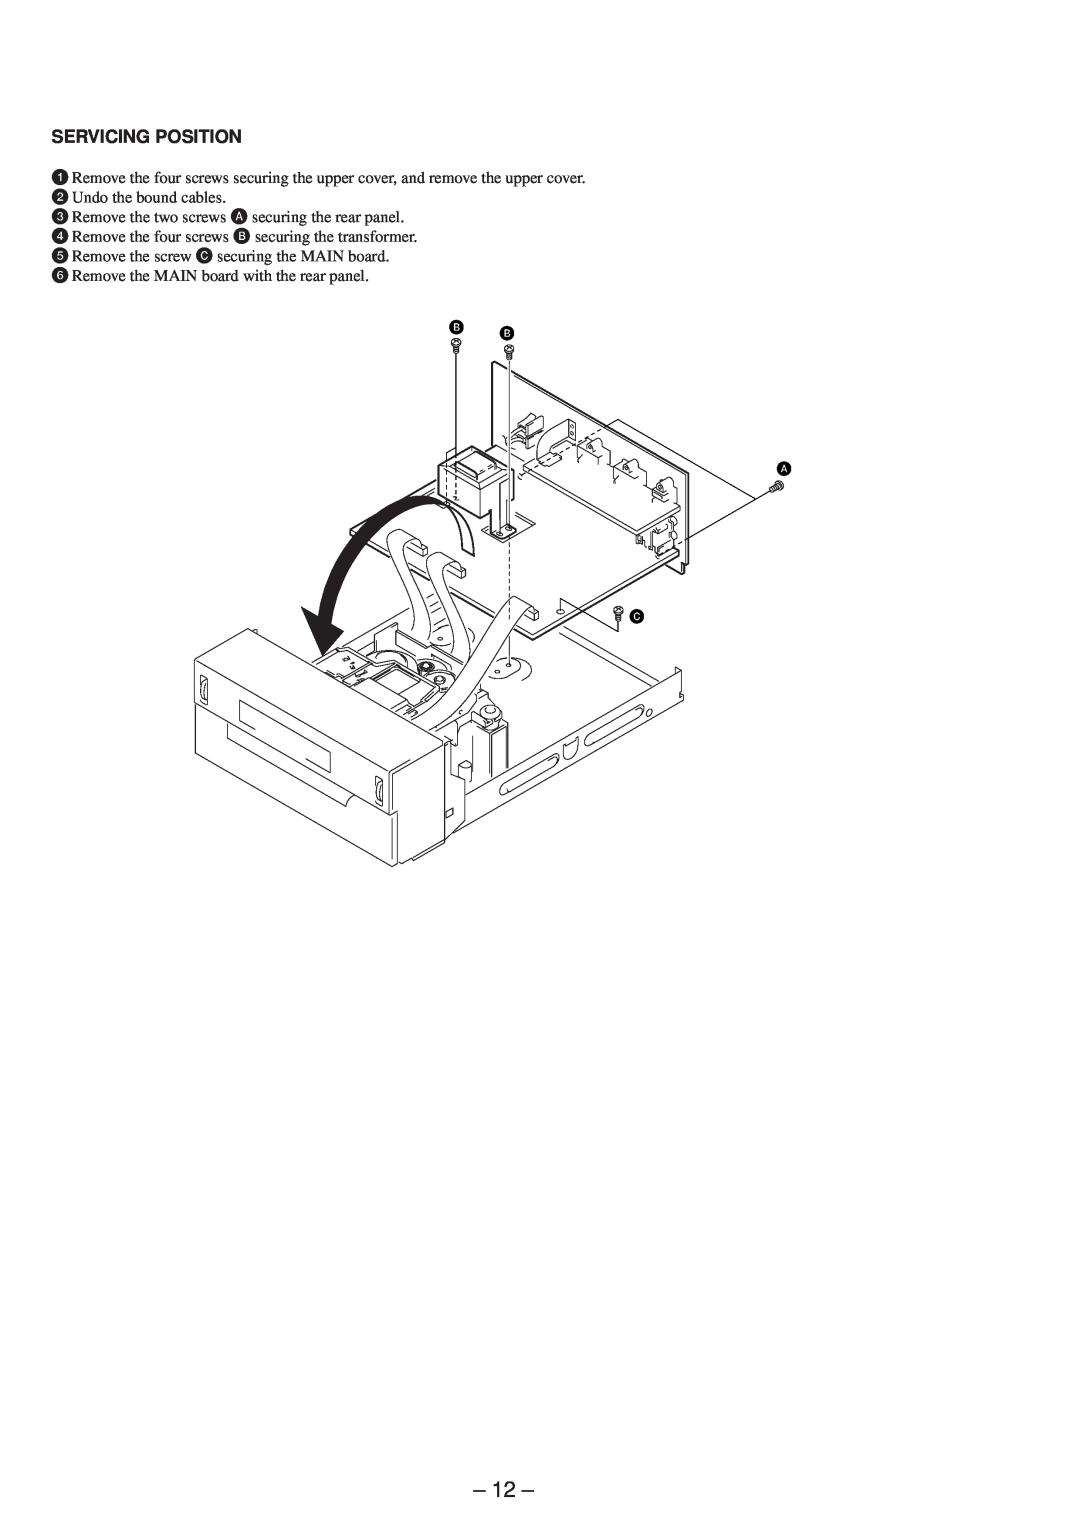 Sony MDS-SD1 service manual Servicing Position 